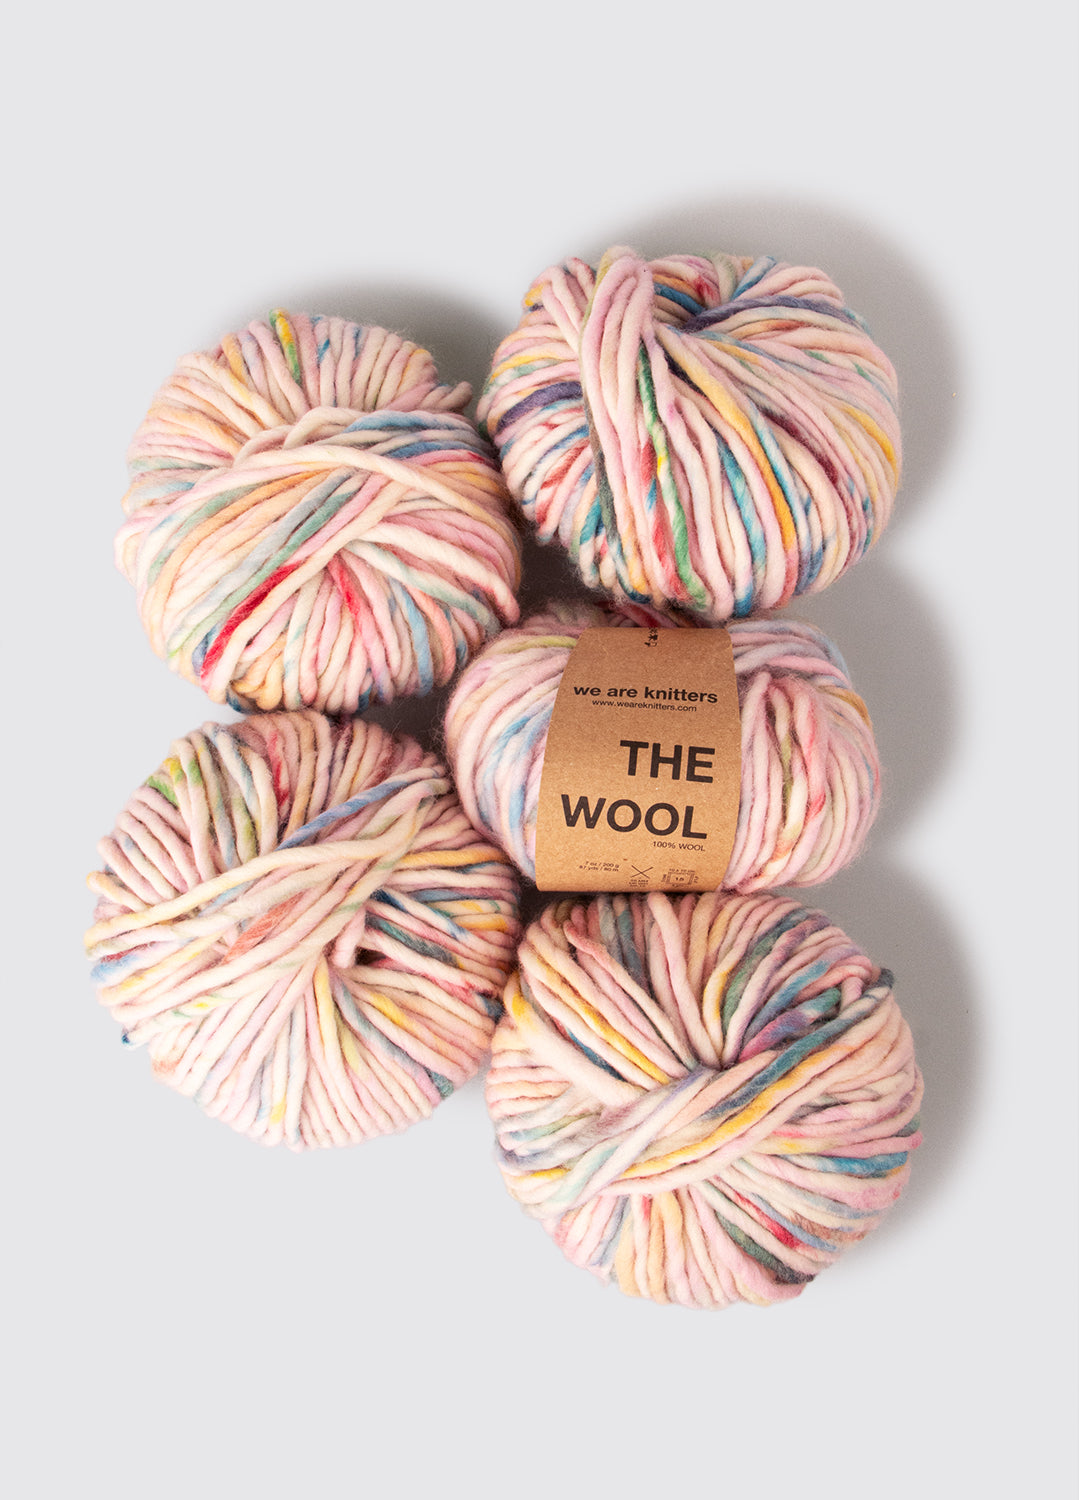 5 Pack of The Wool Yarn Balls